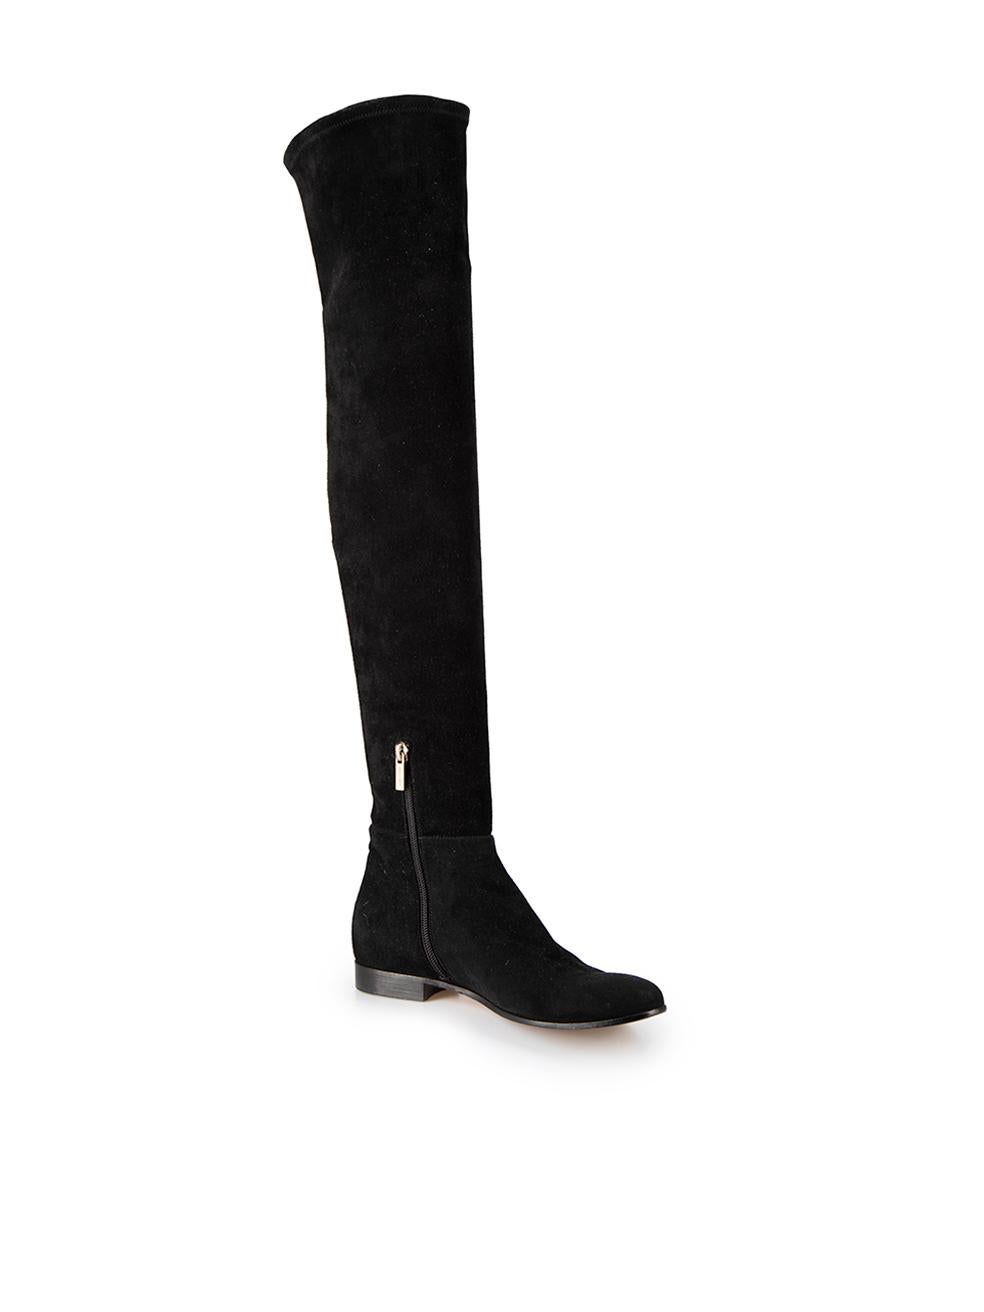 CONDITION is Very good. Minimal wear to boots is evident. Minimal wear to suede on this used Jimmy Choo designer resale item. 



Details


Black

Leather

Thigh high boots

Round toe

Flatform block heel

Side zip closure



 

Made in